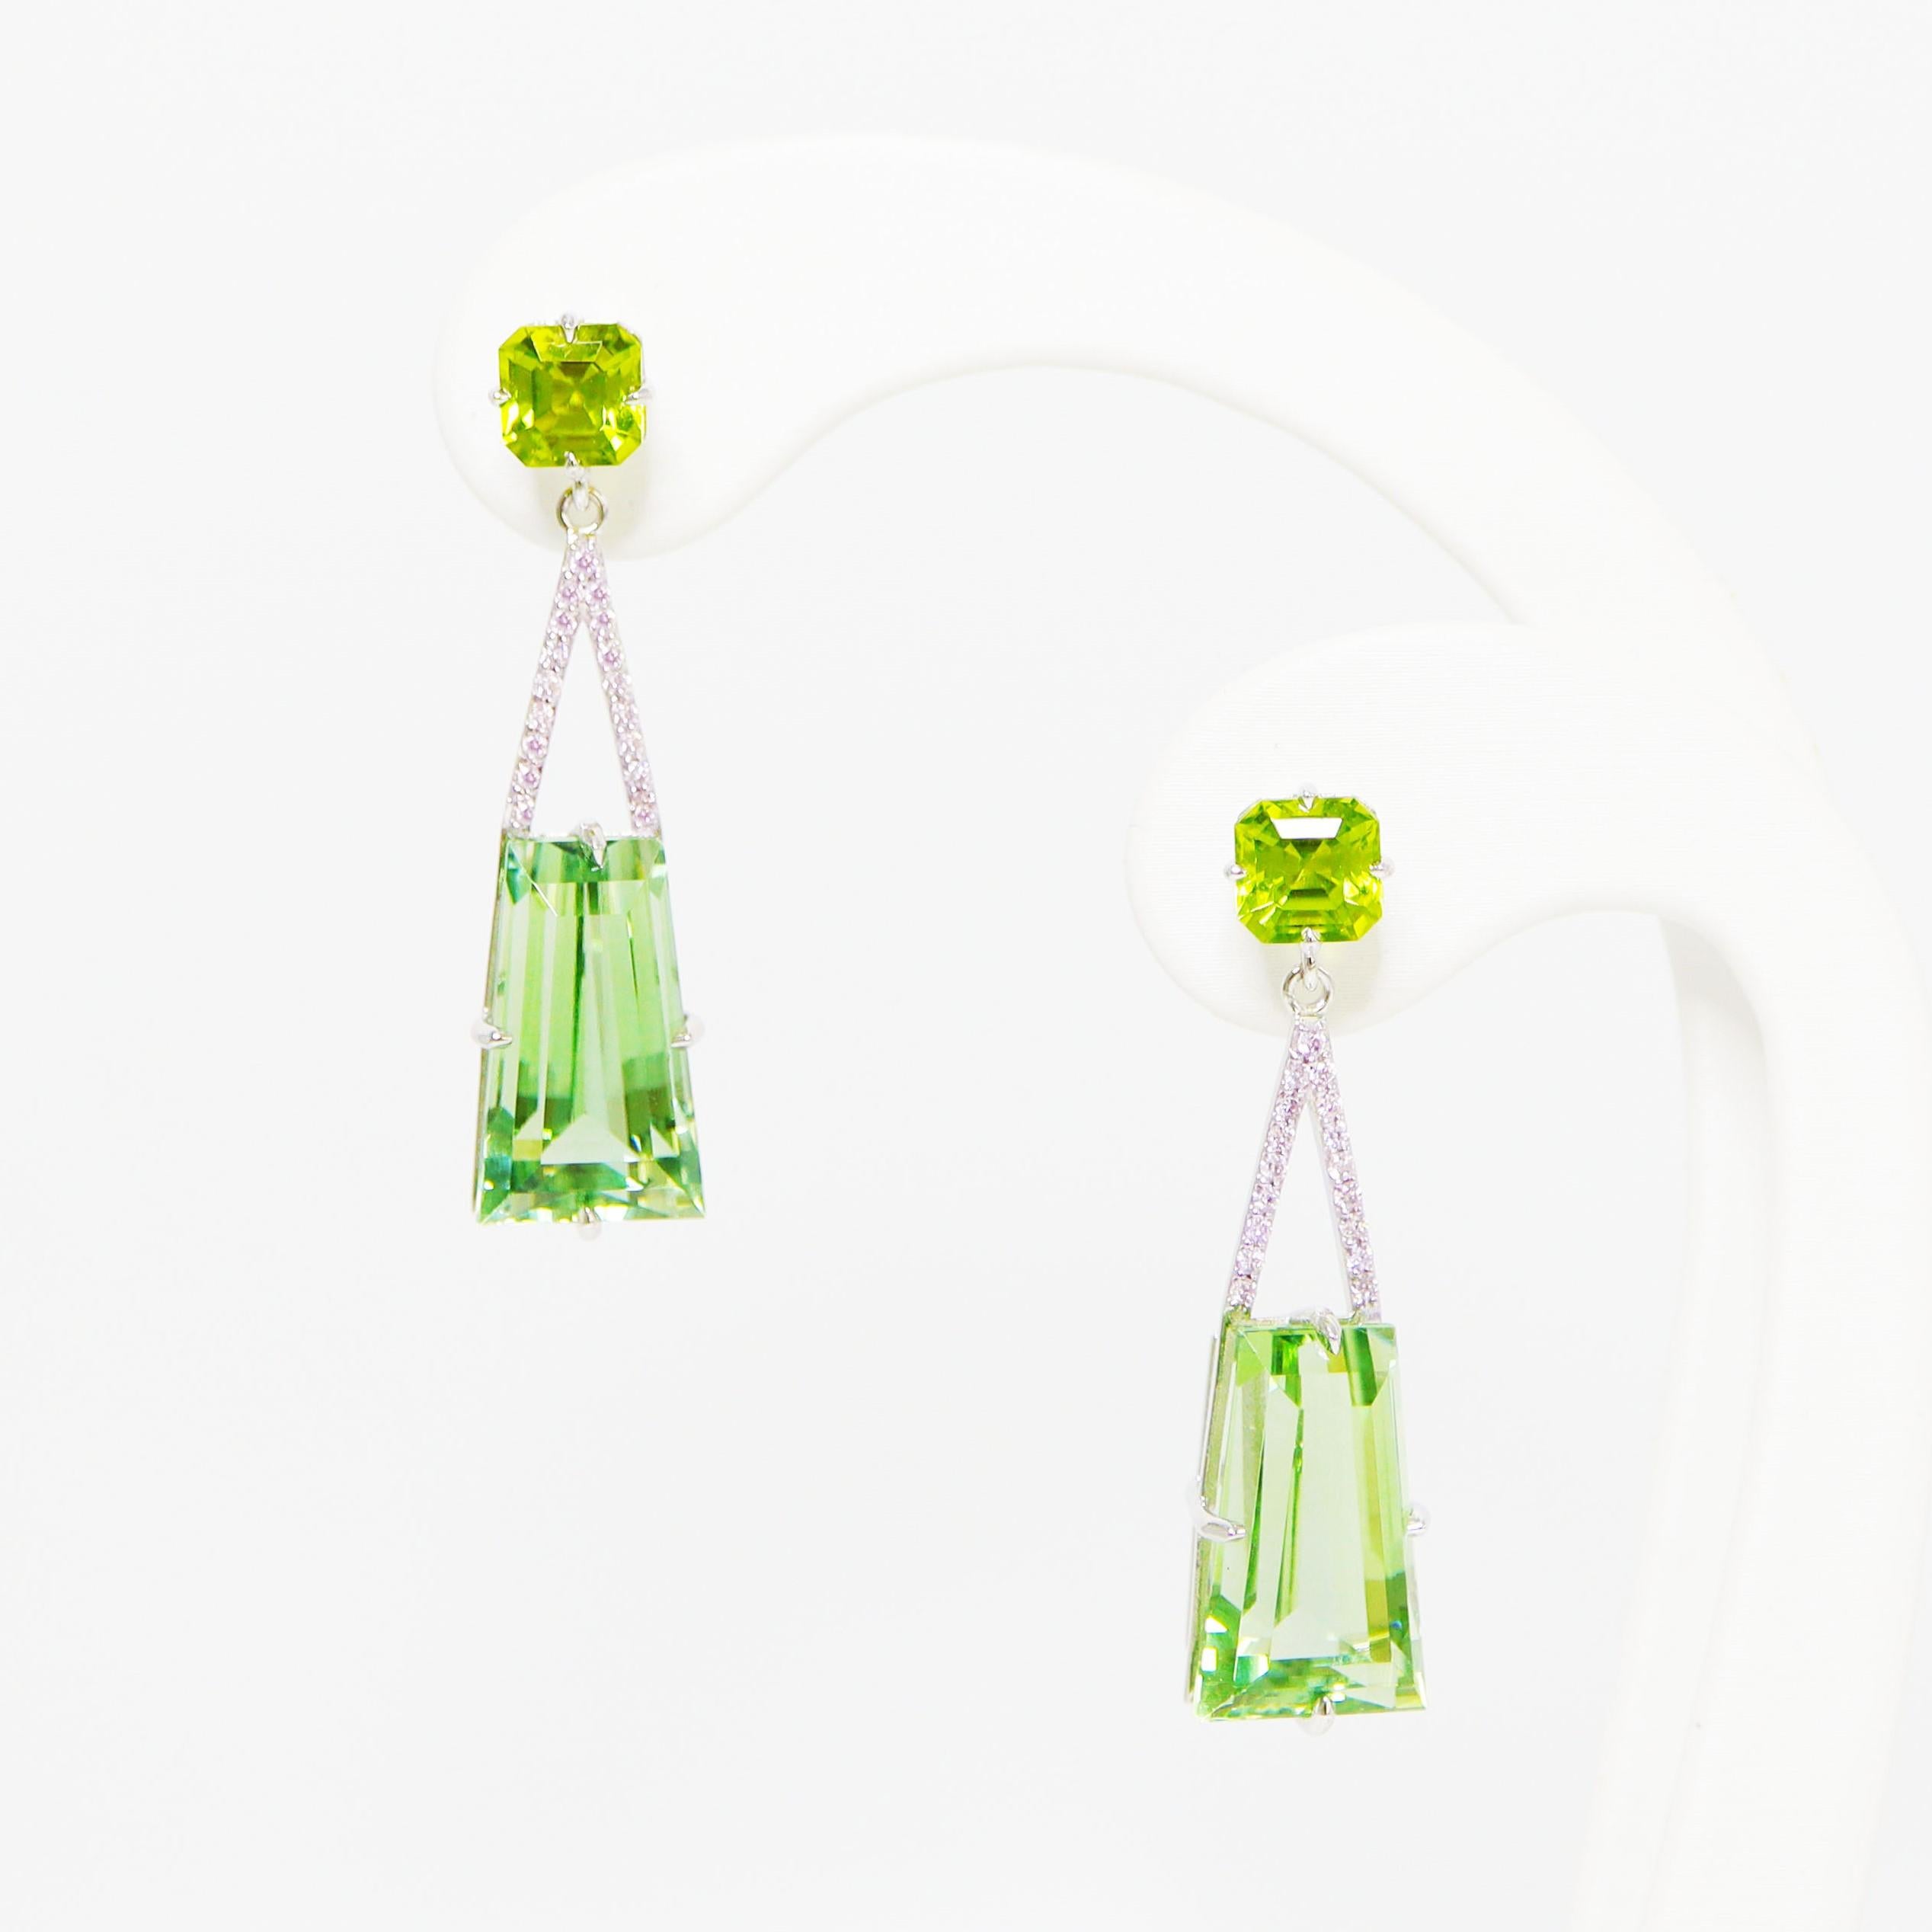 *14k 20.67 Ct Green Prasiolite&Peridot Antique Art Deco Drop Earrings*

Two pieces of natural green Prasiolite weighing 20.67 ct set with genuine intense green Peridot weighing 3.05 ct and natural pink diamonds weighing 0.24 ct make the earrings